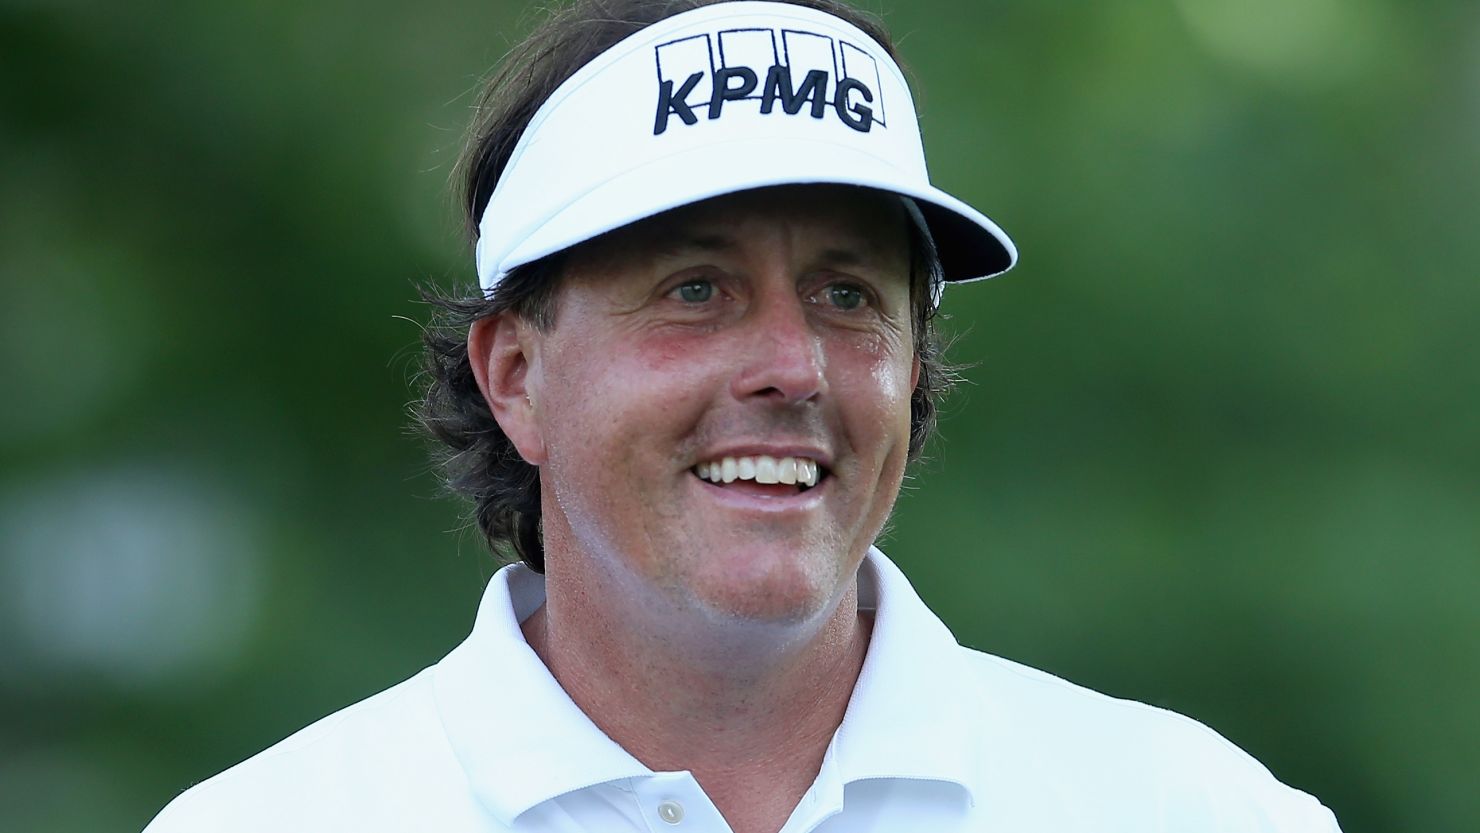 Phil Mickelson is all smiles as he charges into contention at the St. Jude Classic in Memphis